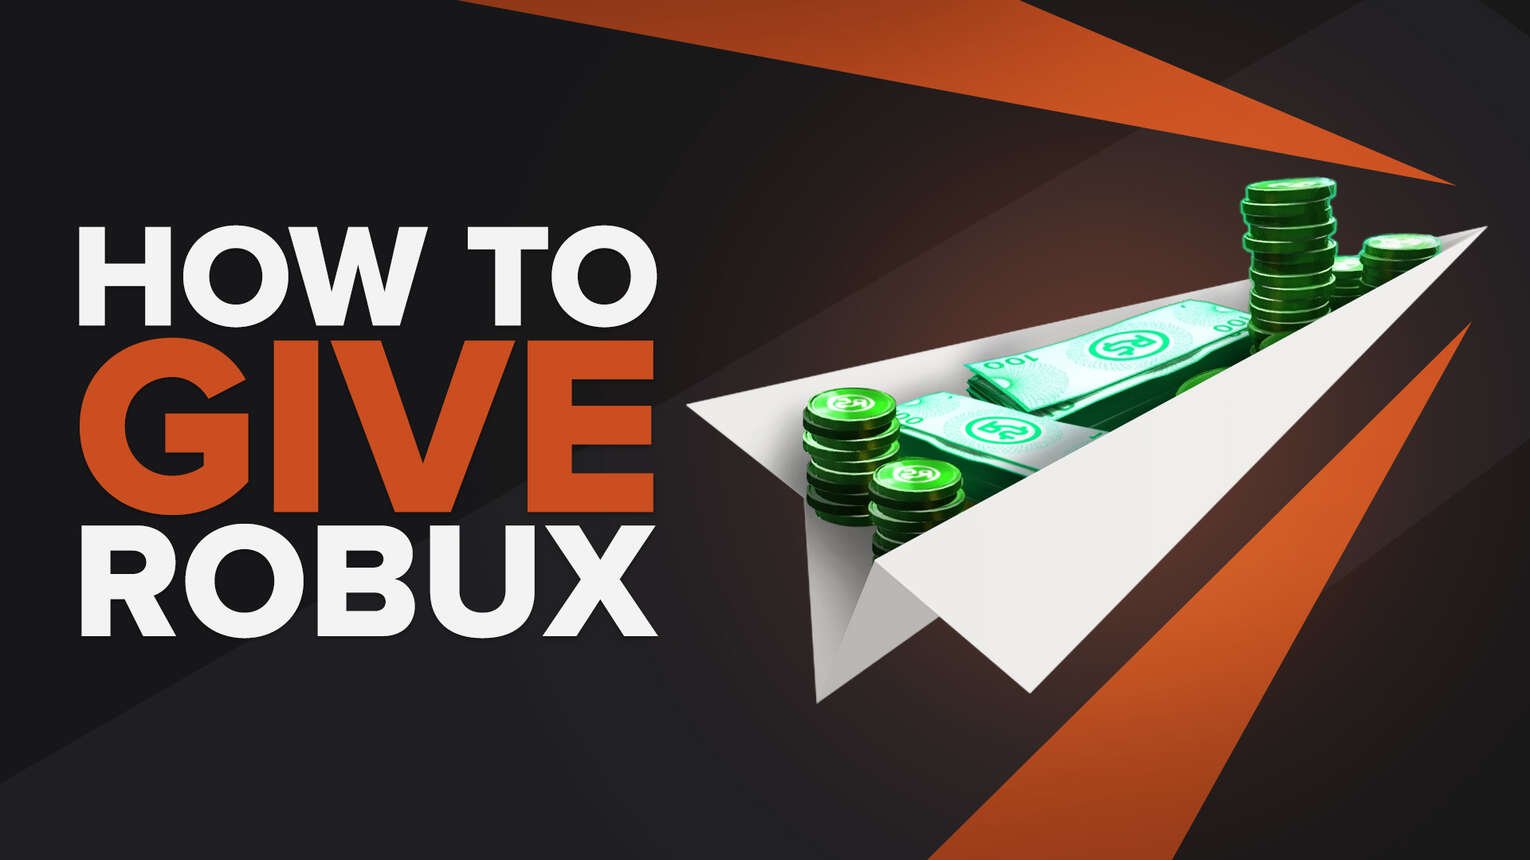 How To Give People Robux In Roblox (Step-By-Step Guide)